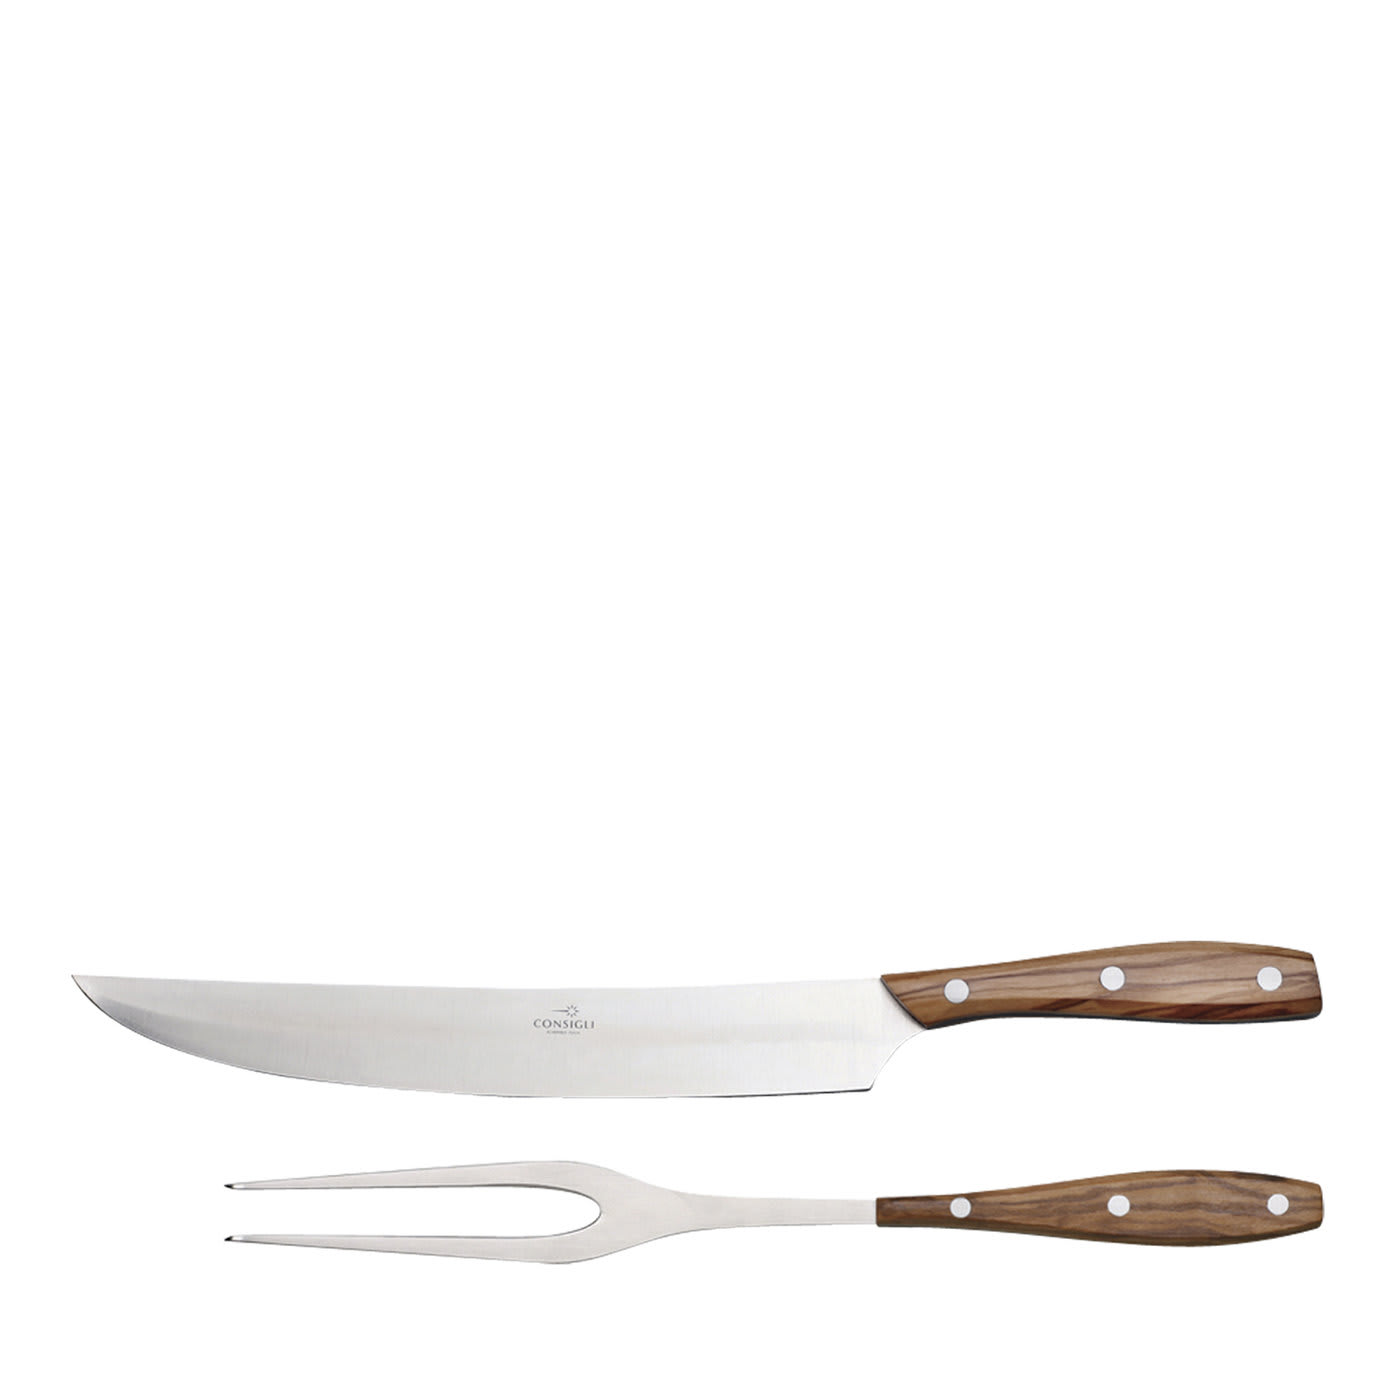 Set of Carving Knife and Fork with Olive Wood Handle - Coltellerie Berti